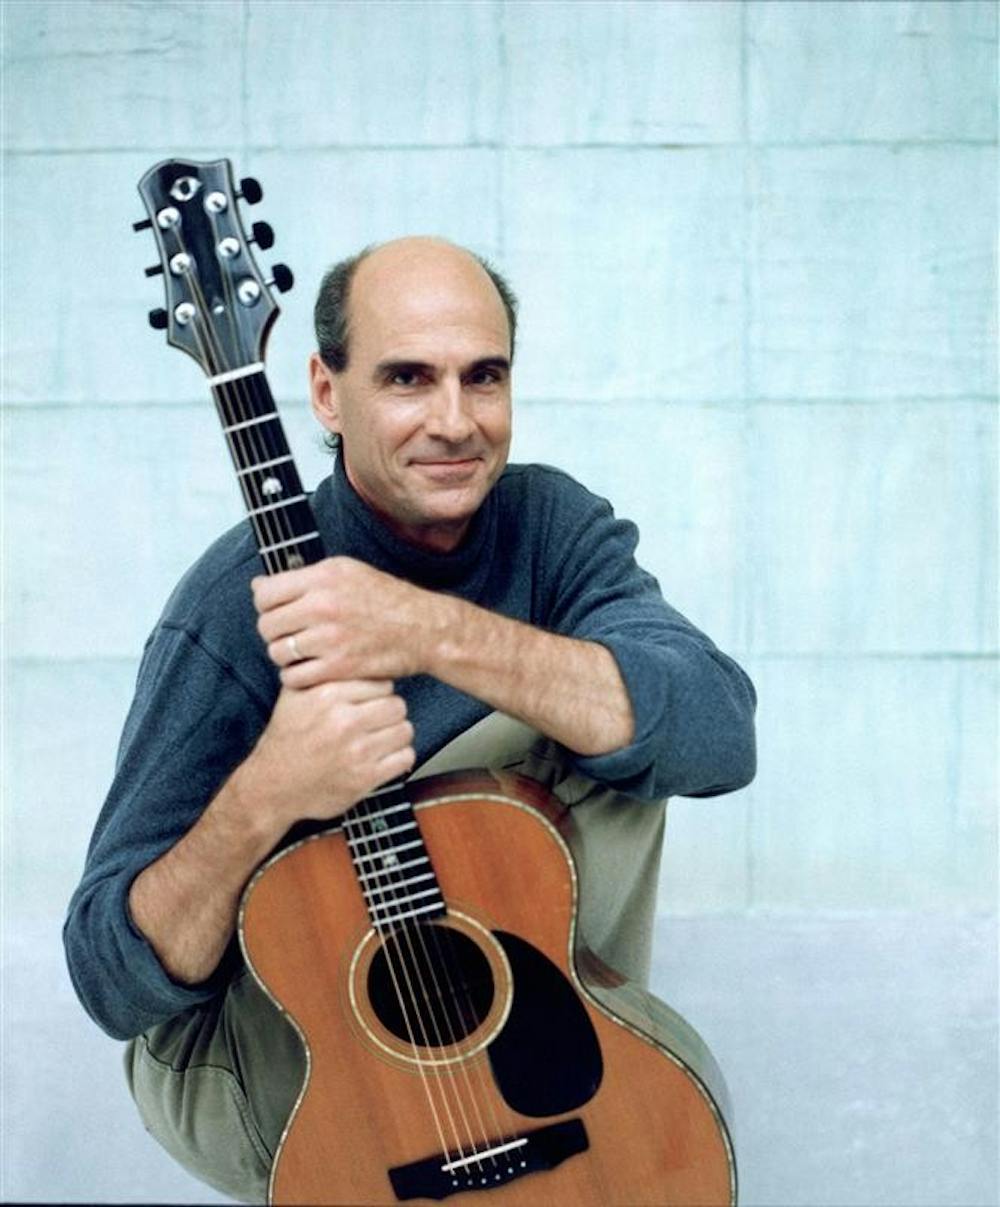 James Taylor continues to be cool after all these years.